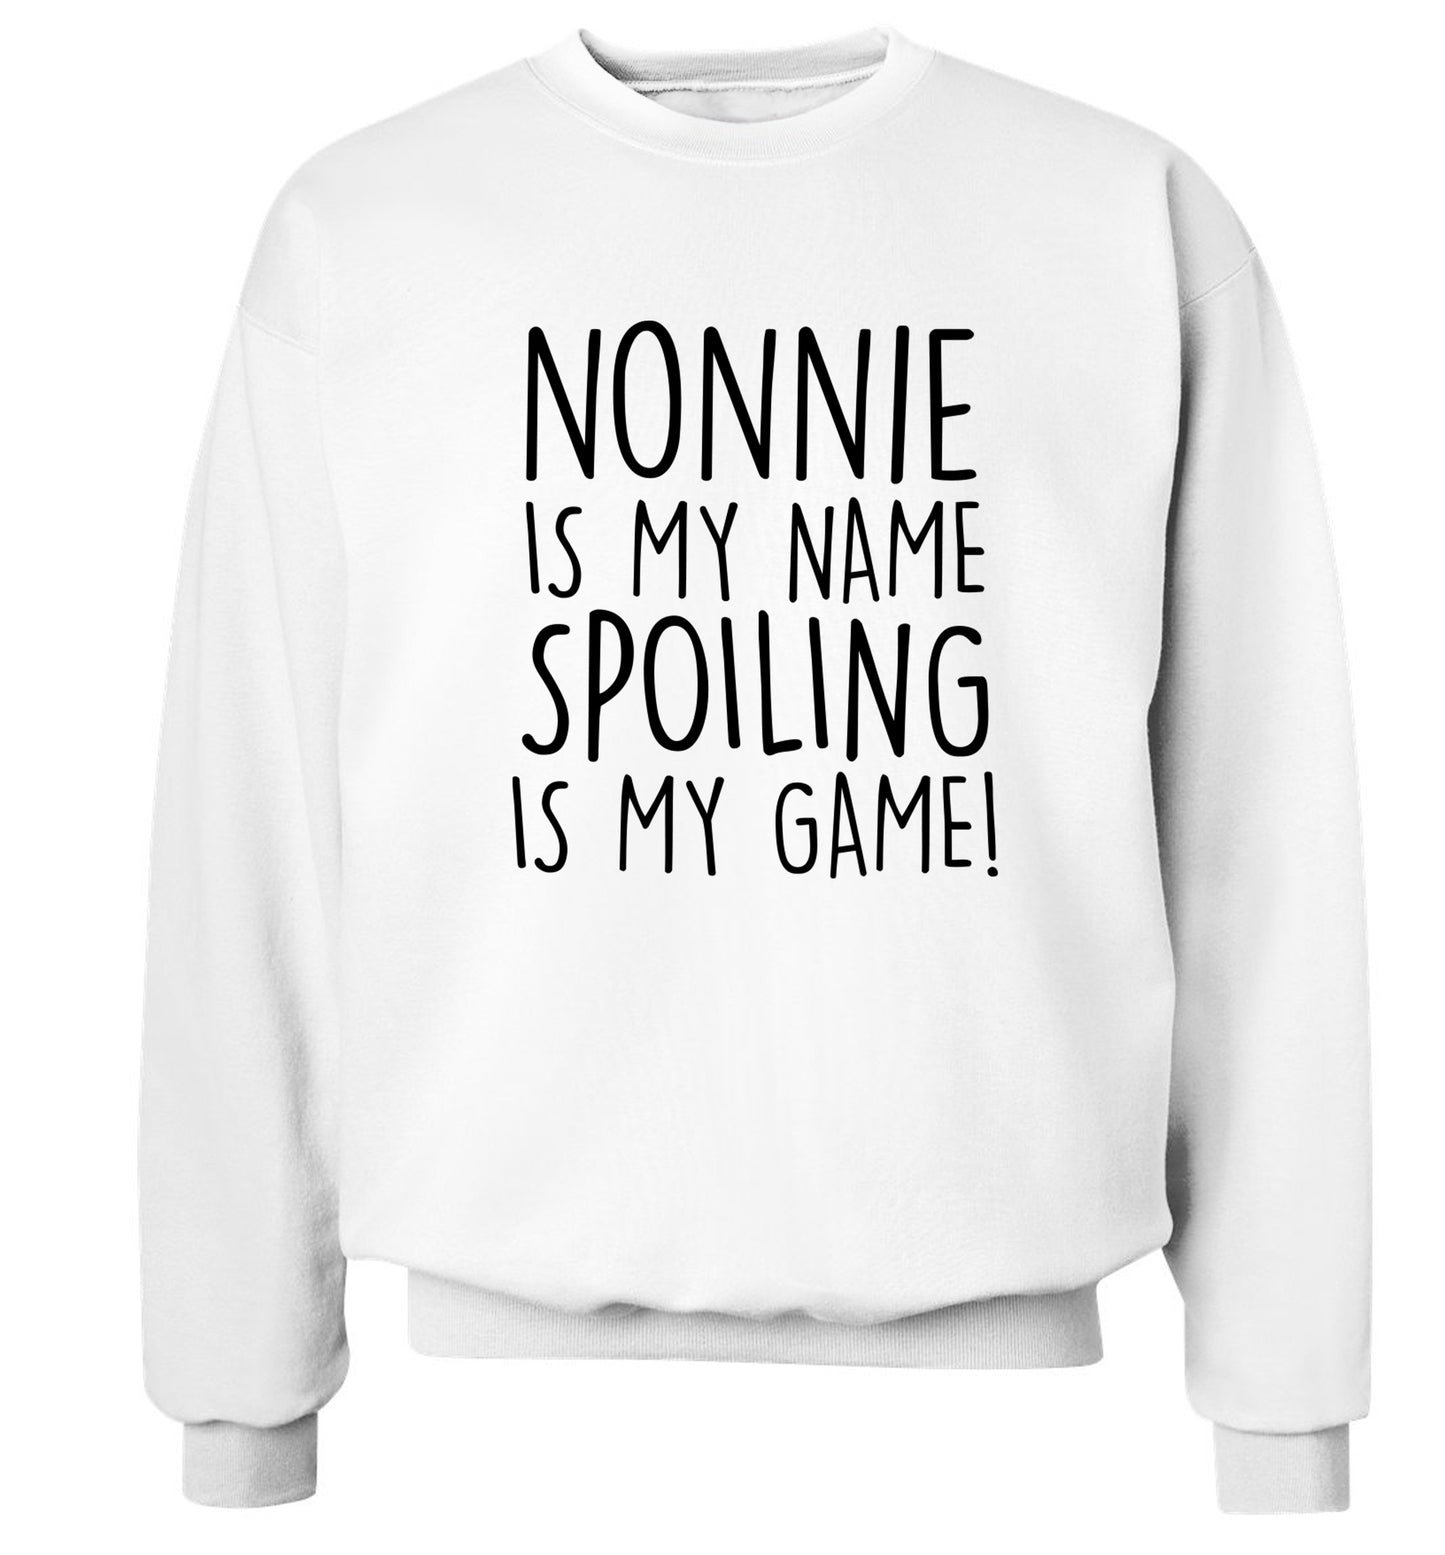 Nonnie is my name, spoiling is my game Adult's unisex white Sweater 2XL